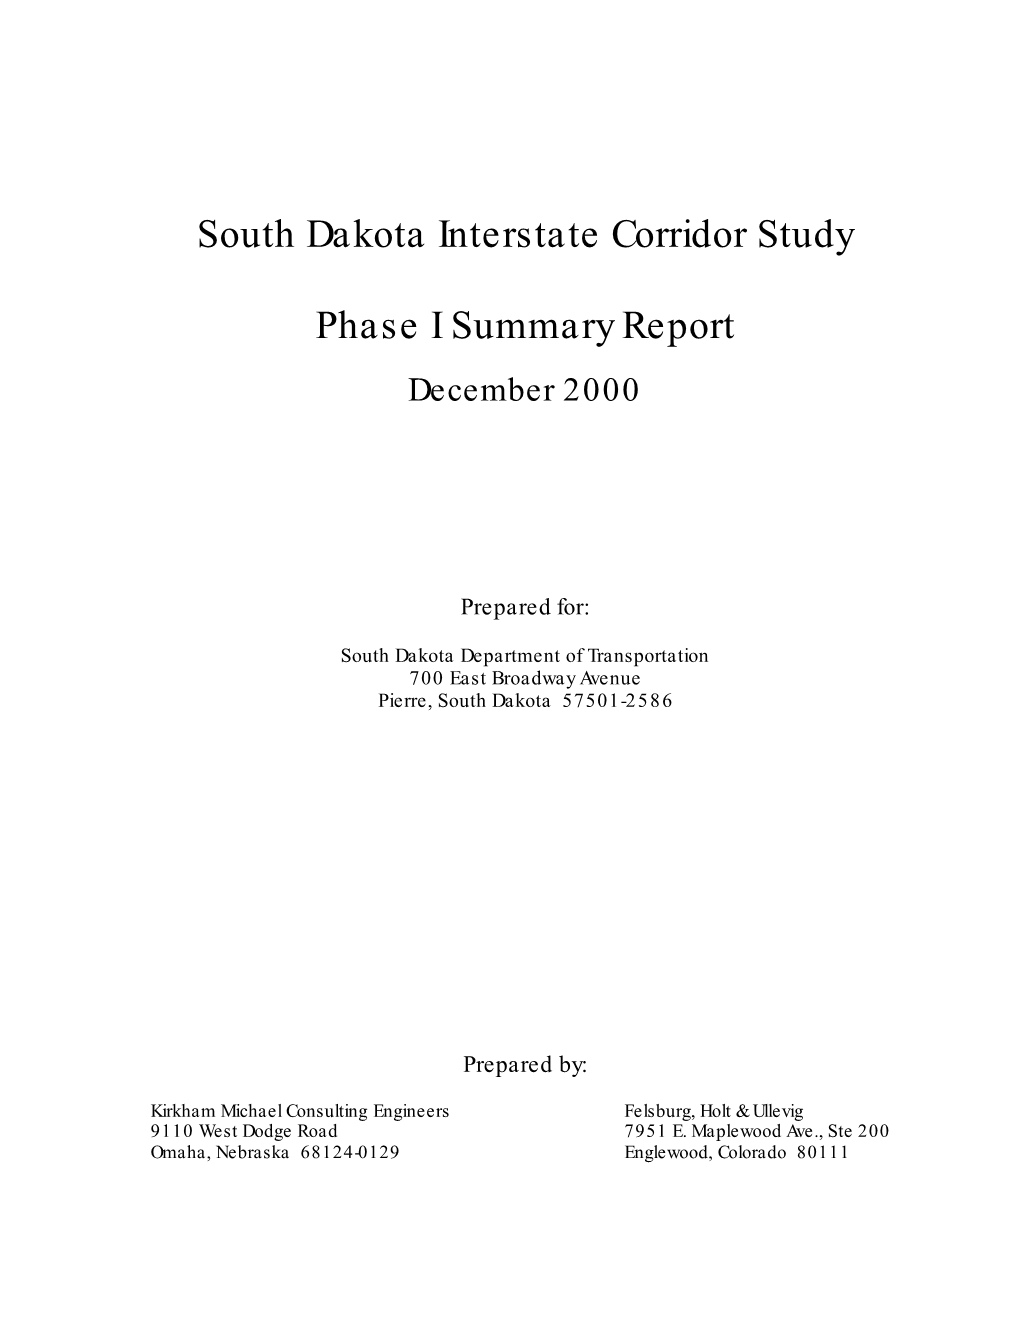 Interstate Corridor Study Phase I Final Report